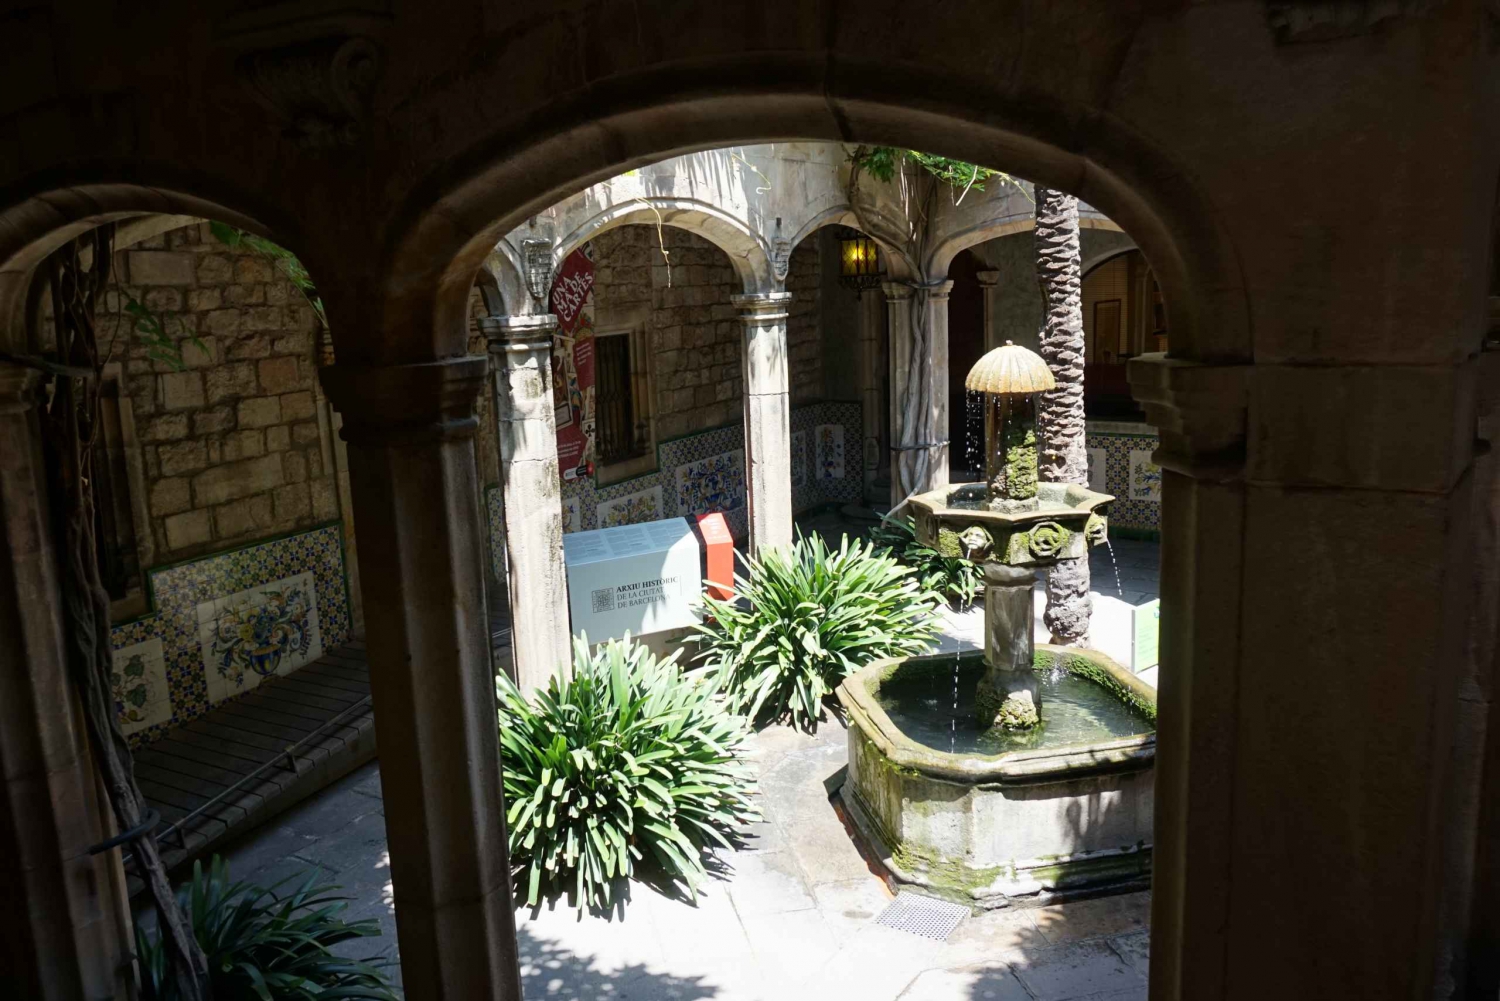 Barcelona: Slow Tour of the Gothic Quarter and Beyond